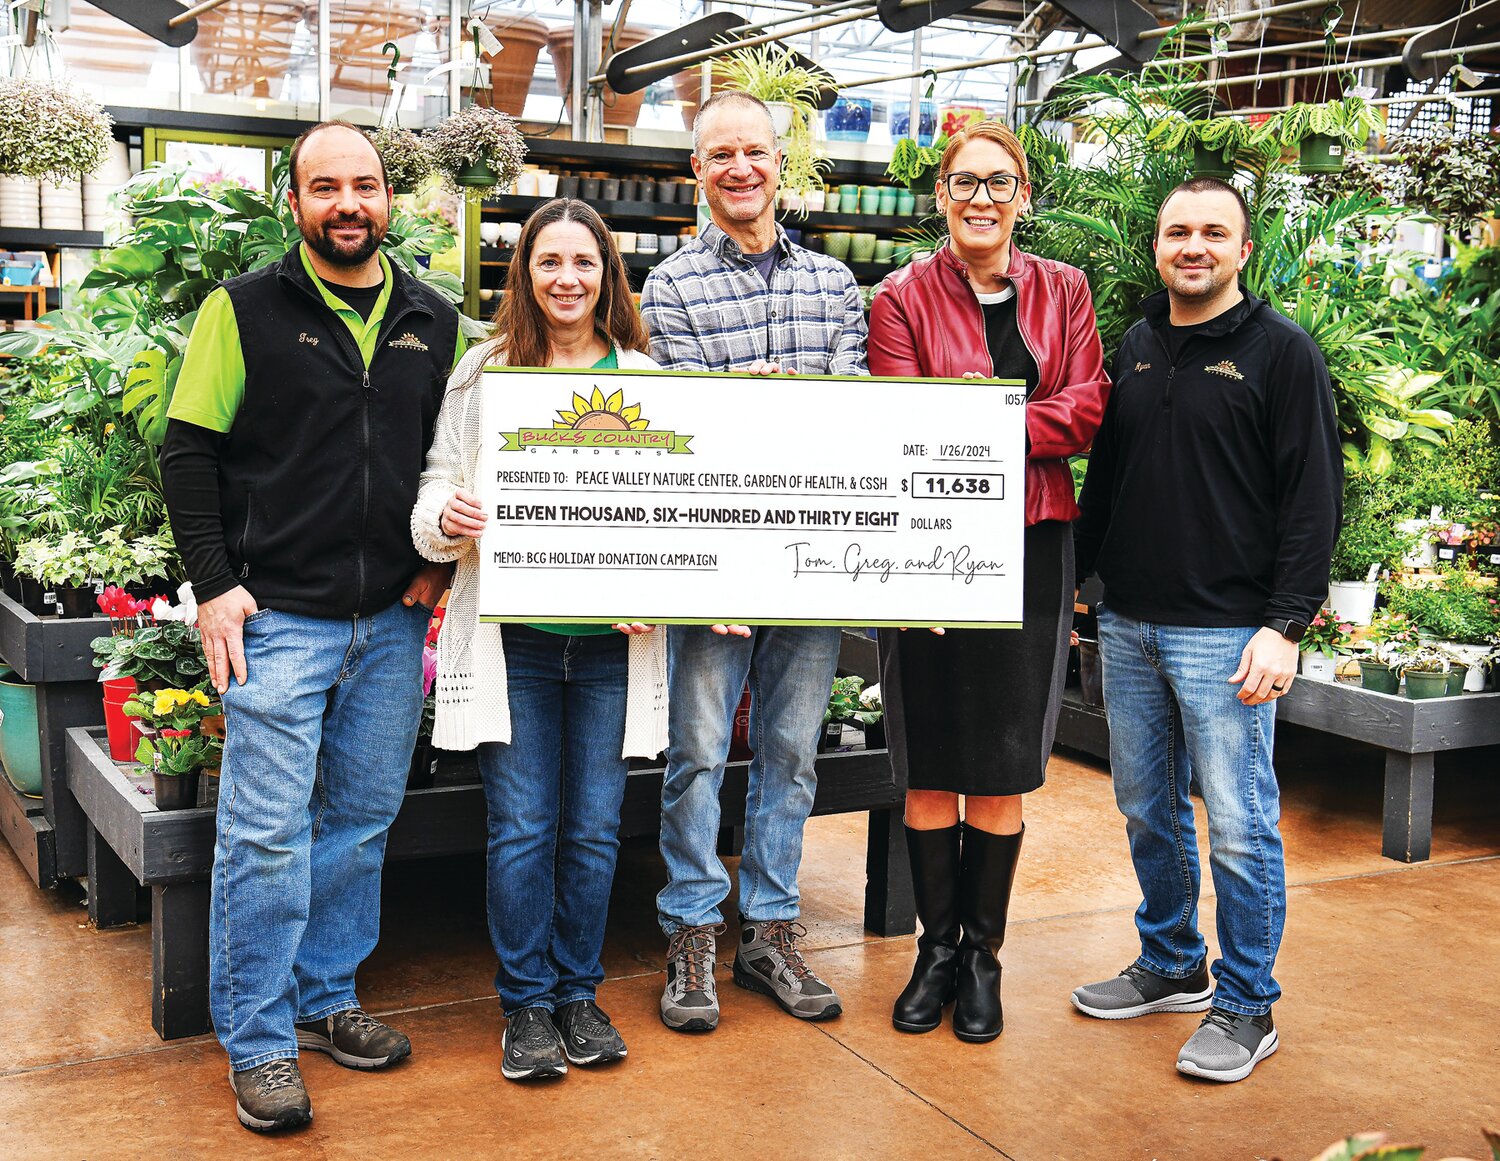 A ceremonial check is presented to Andy Jarin (director, Friends of PVNC), Carol Bauer (founder & COO, Garden of Health Food Bank), and Nicole Buckley-Mormello (executive director, CSSH), by Greg Hebel (landscape division manager) and Ryan Hebel (garden center manager) from Bucks Country Gardens.